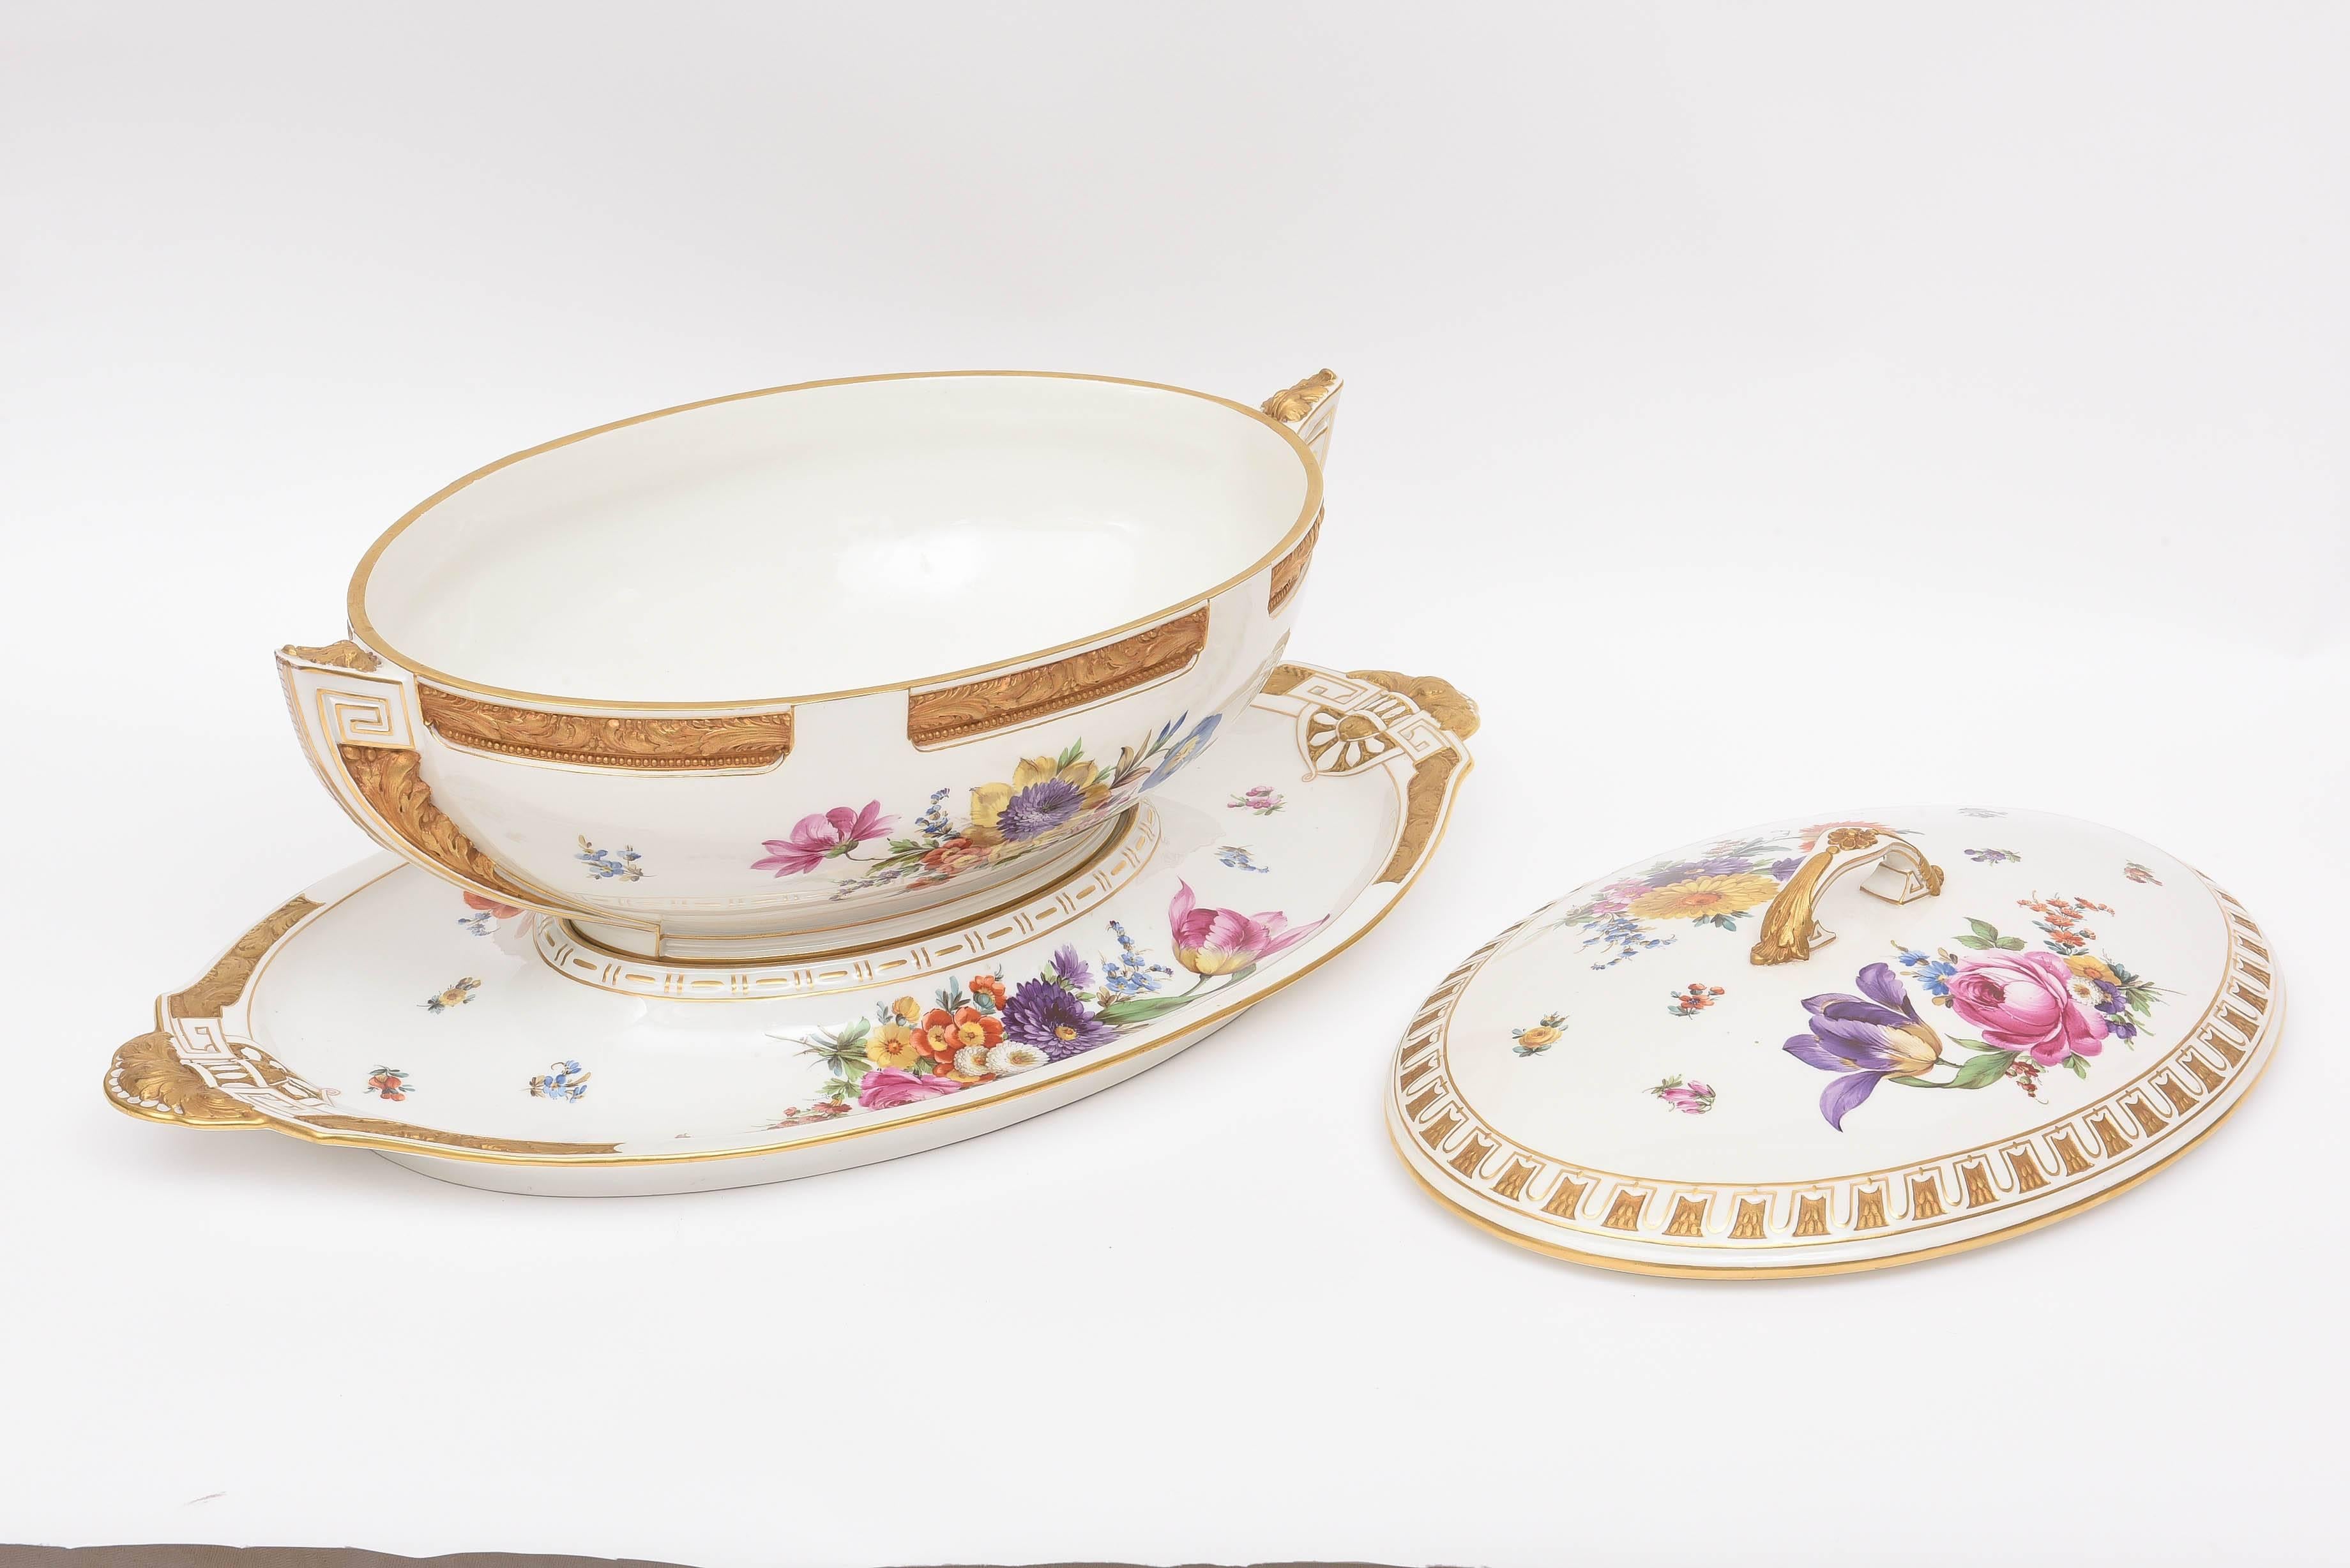 19th Century Impressive 19th century KPM Tureen and Stand, Hand Painted, Gilt Encrusted